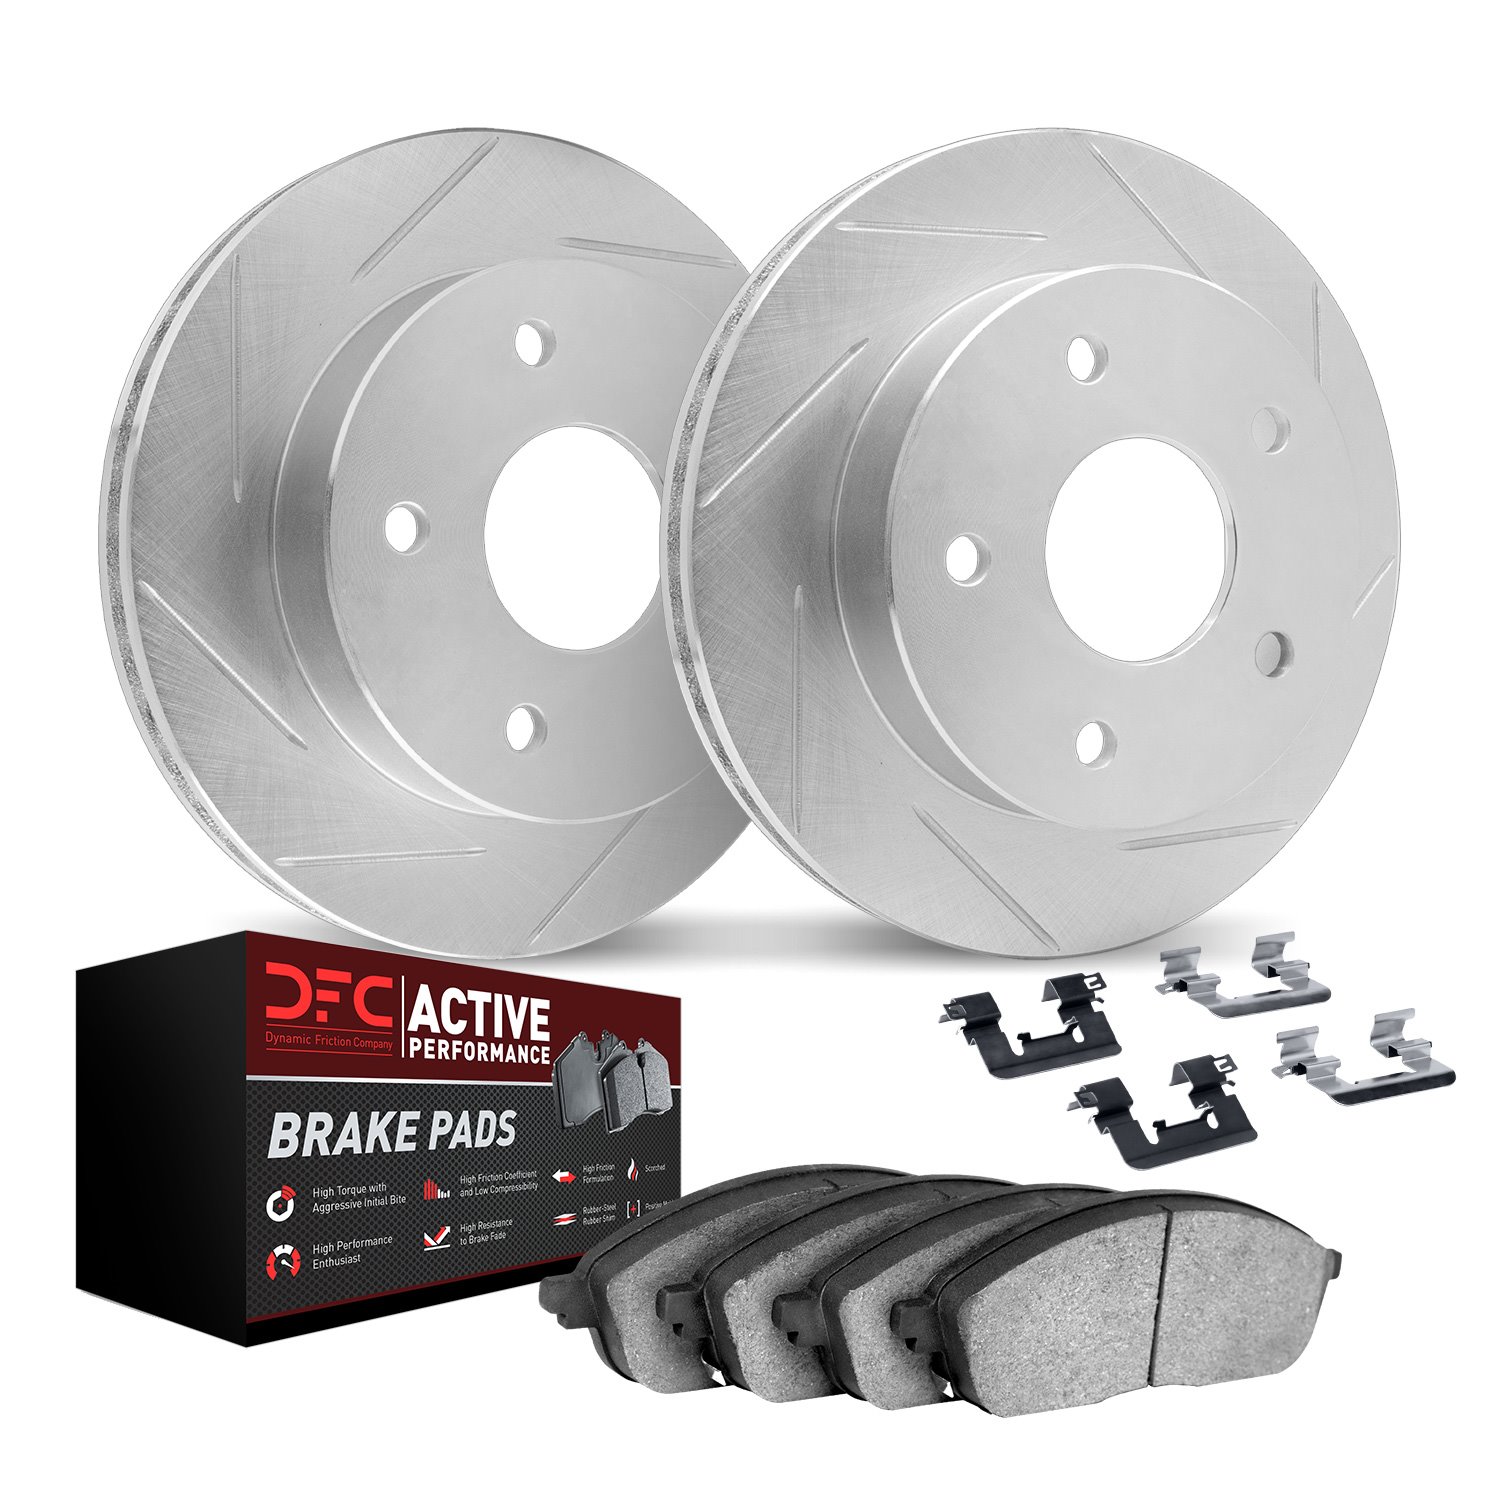 2712-59126 Geoperformance Slotted Brake Rotors with Active Performance Pads Kits & Hardware, Fits Select Acura/Honda, Position: